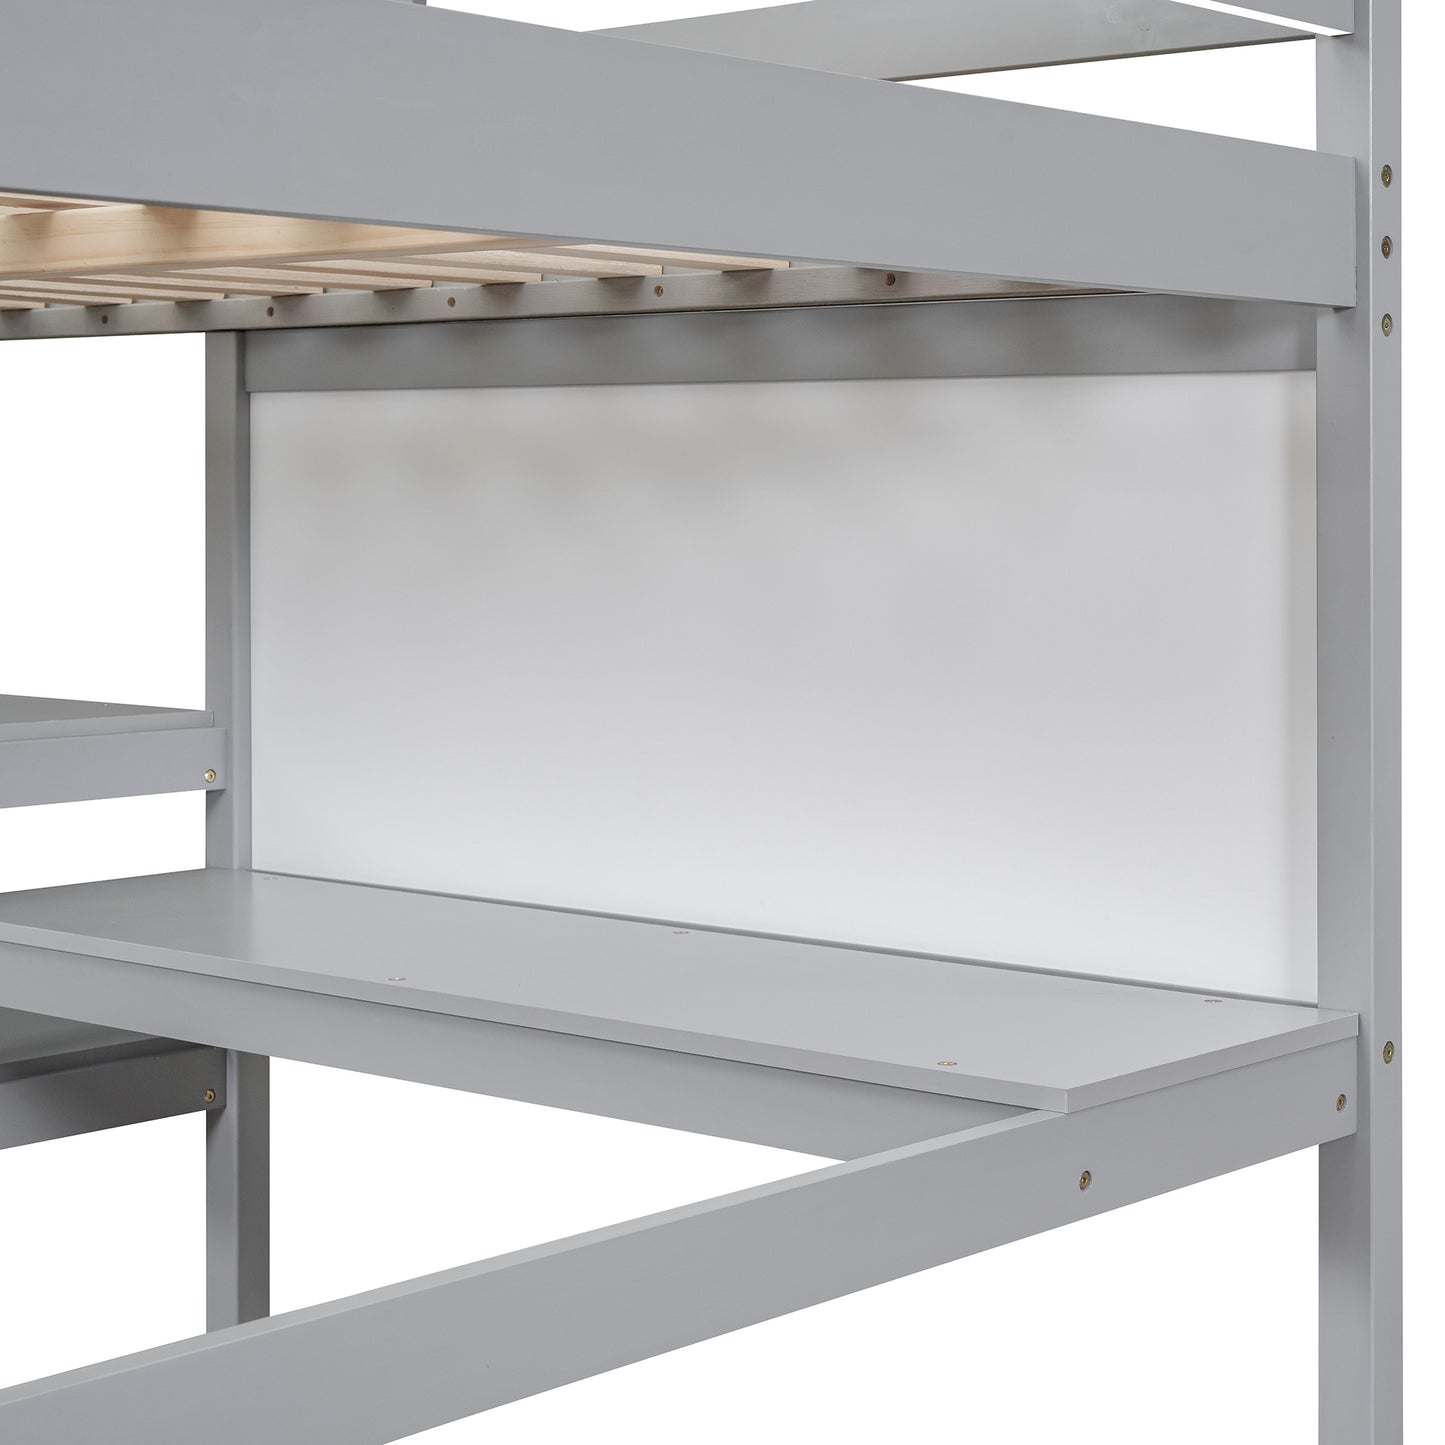 Full Size Wooden Loft Bed with Shelves, Desk and Writing Board - Gray